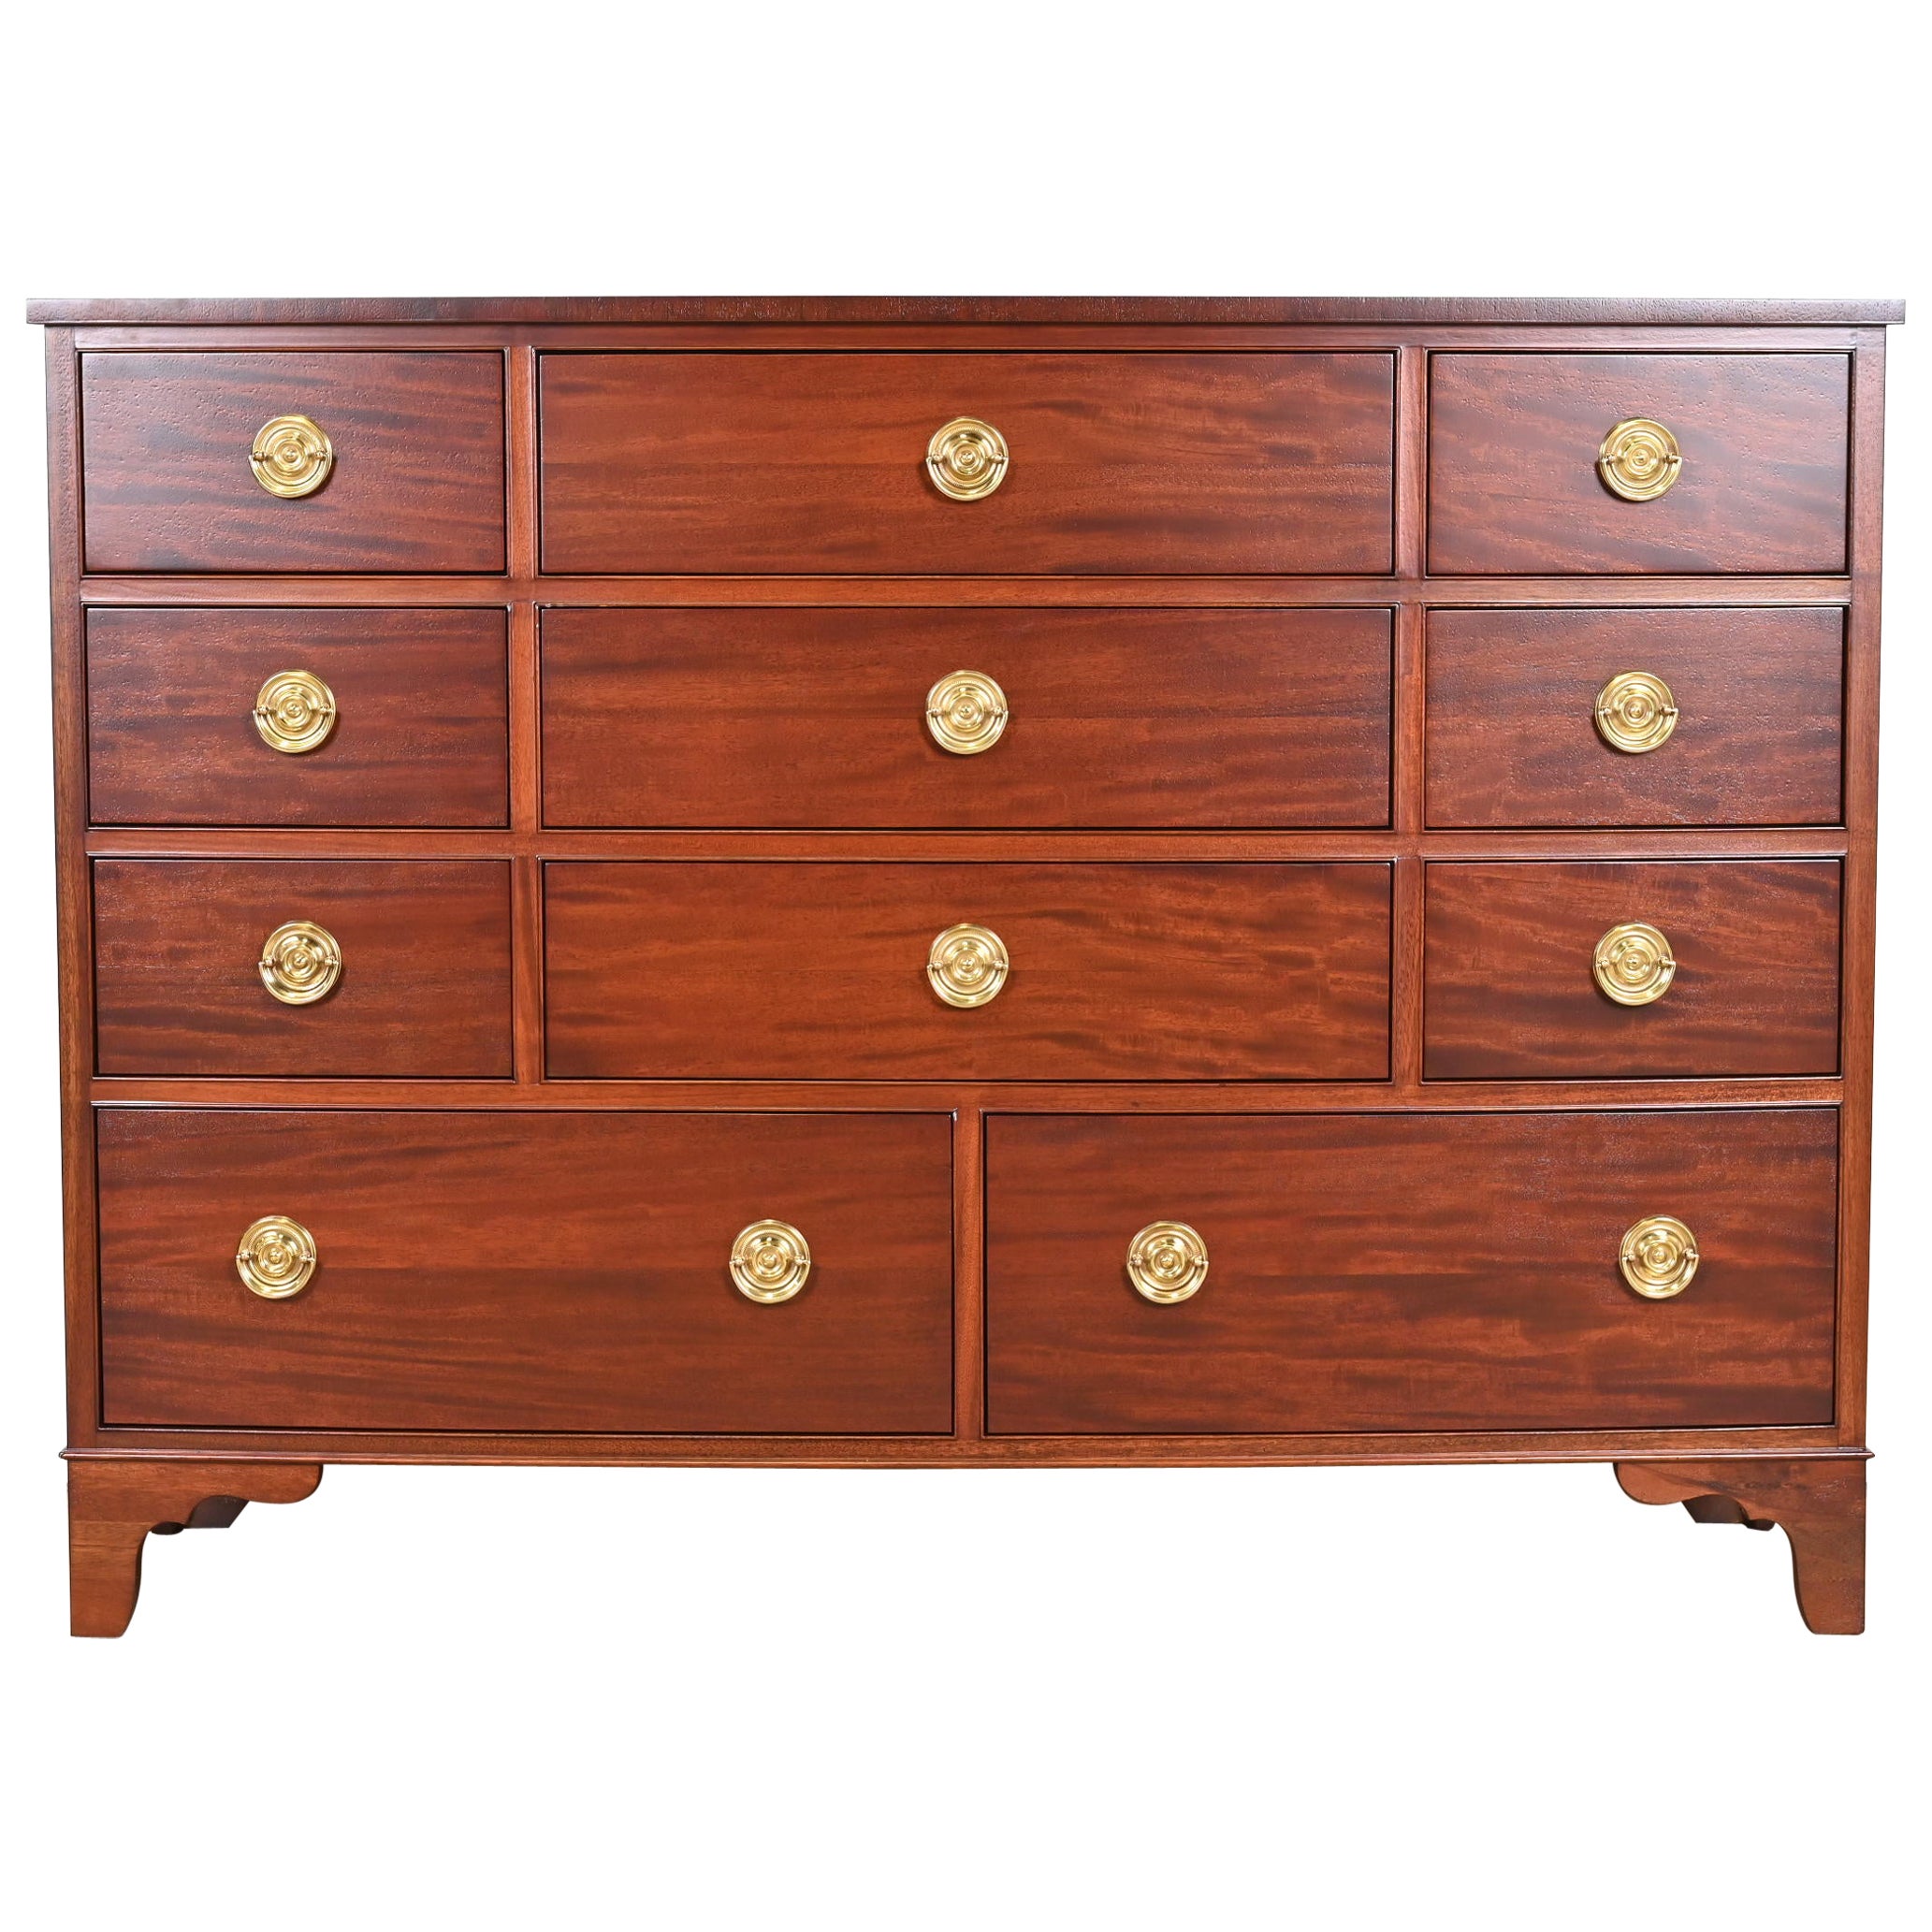 Baker Furniture Georgian Mahogany Bow Front Dresser Chest, Newly Refinished